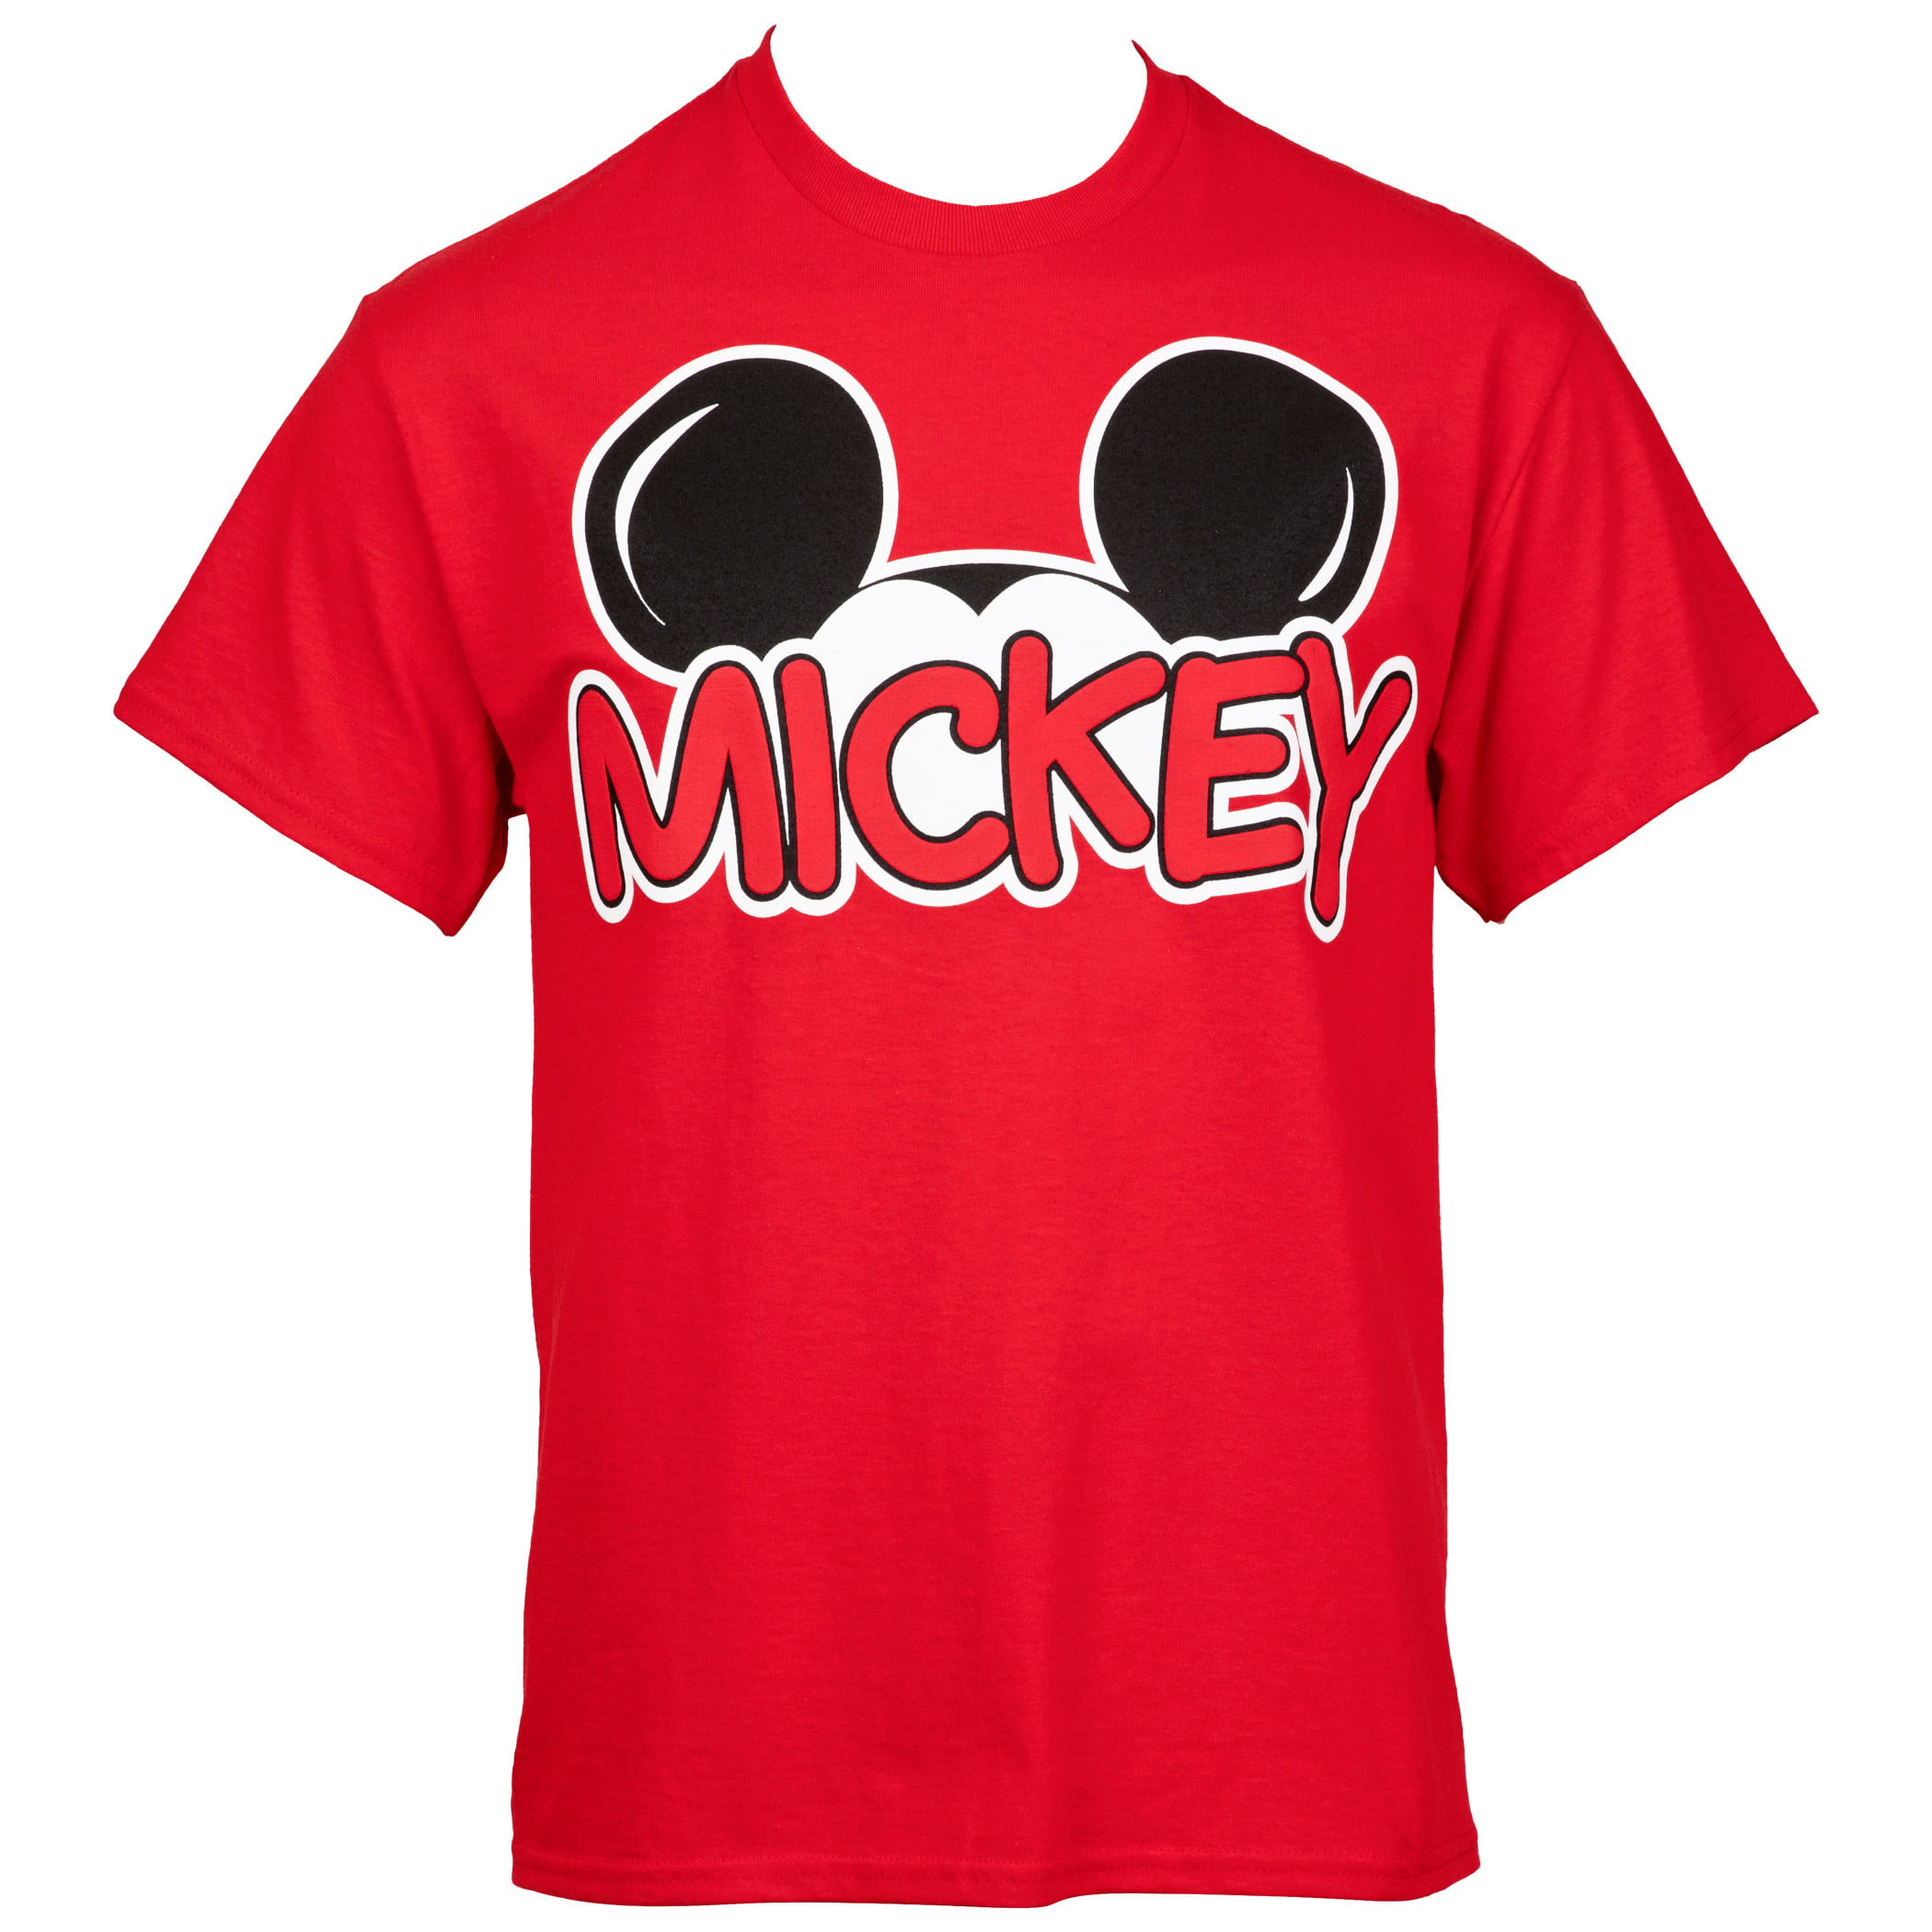 Signature Disney Family T-Shirt-XLarge Ears Mouse Mickey